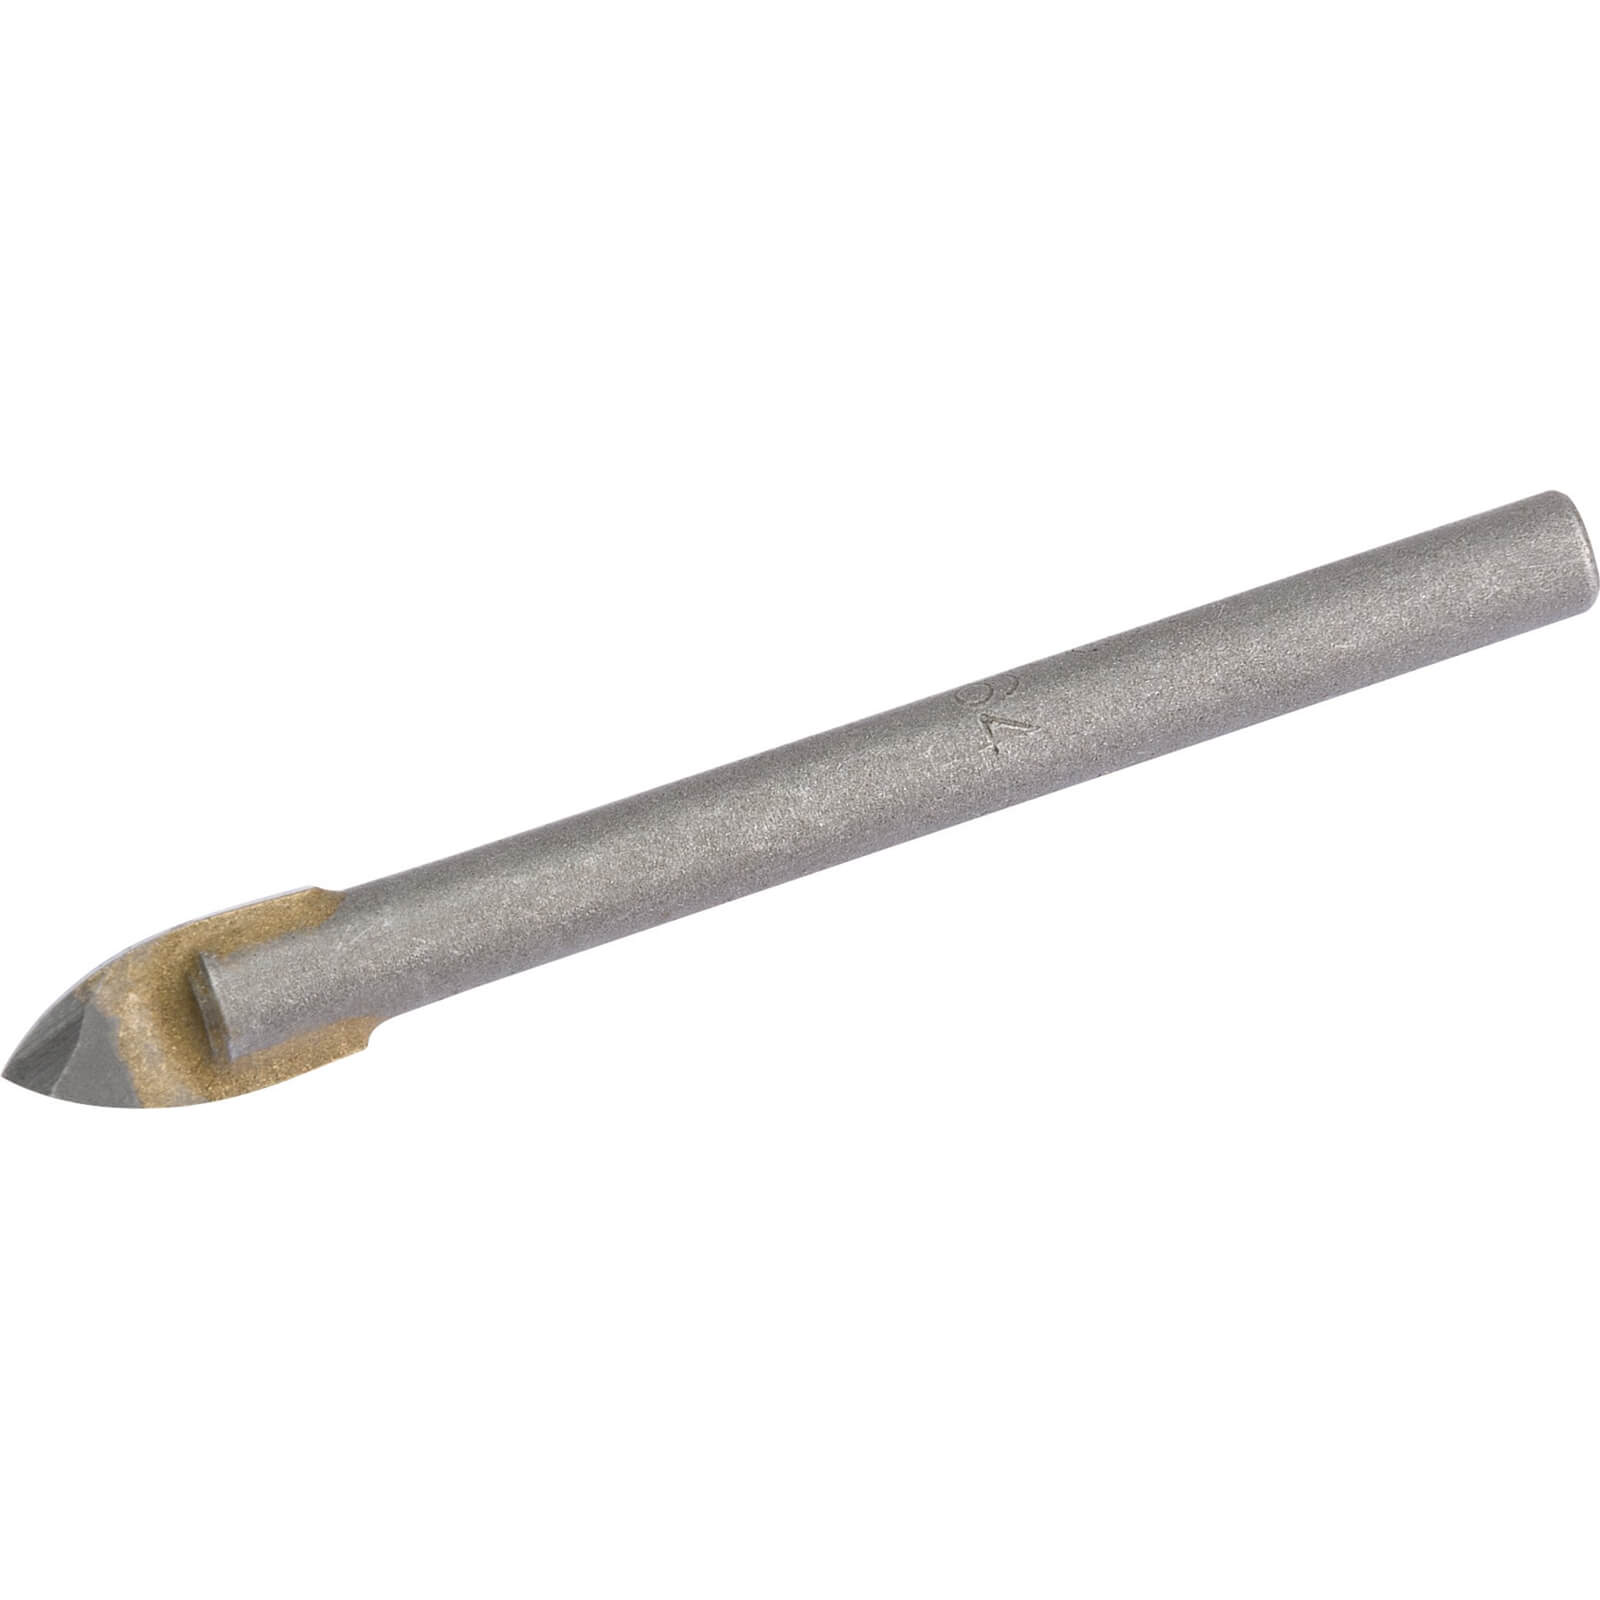 Image of Draper Expert Tile and Glass Drill Bit 6mm